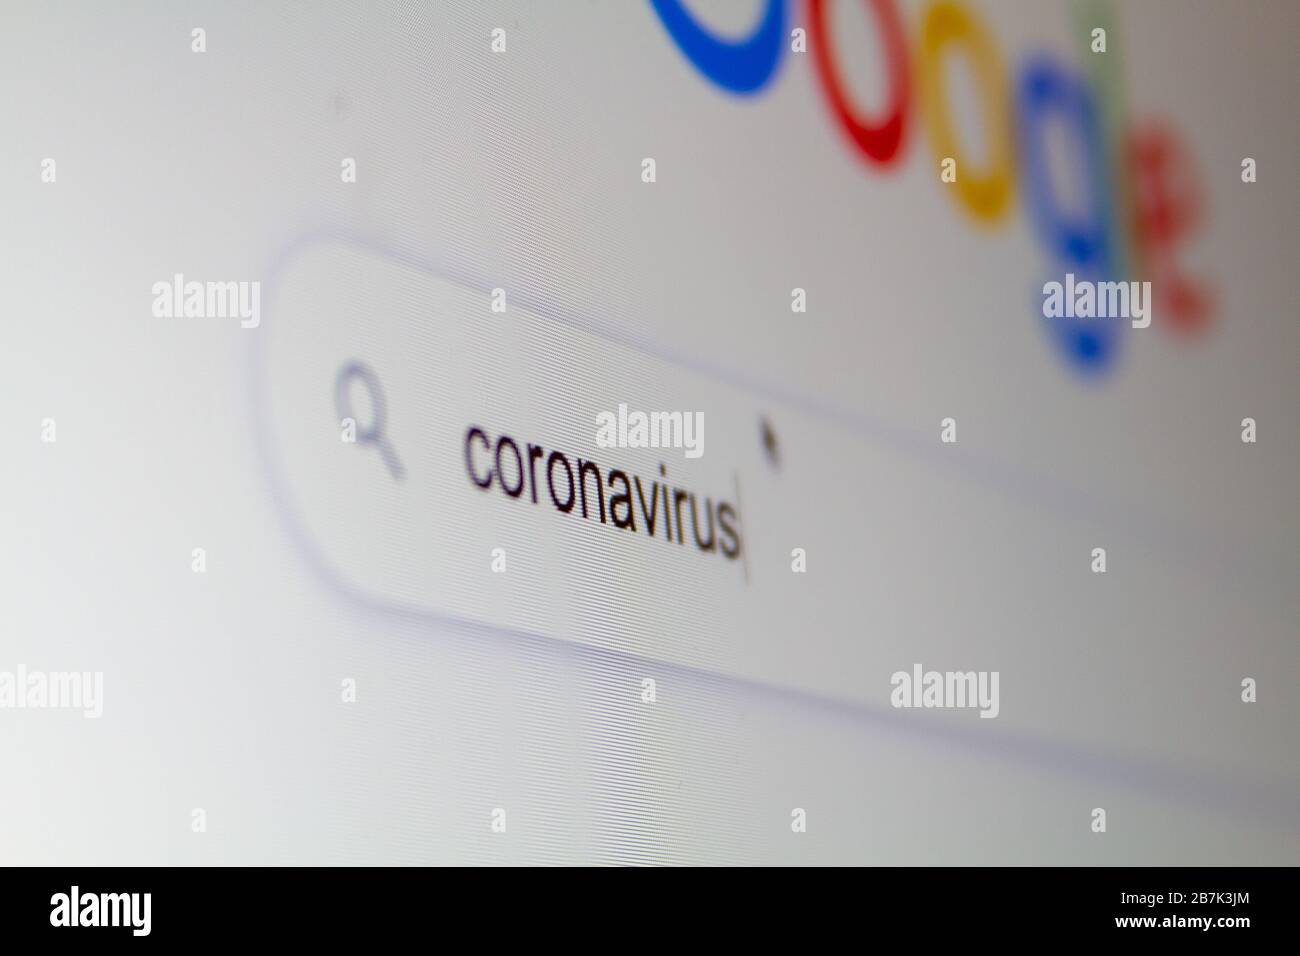 Search for 'coronavirus' in an internet search engine on a computer. Stock Photo